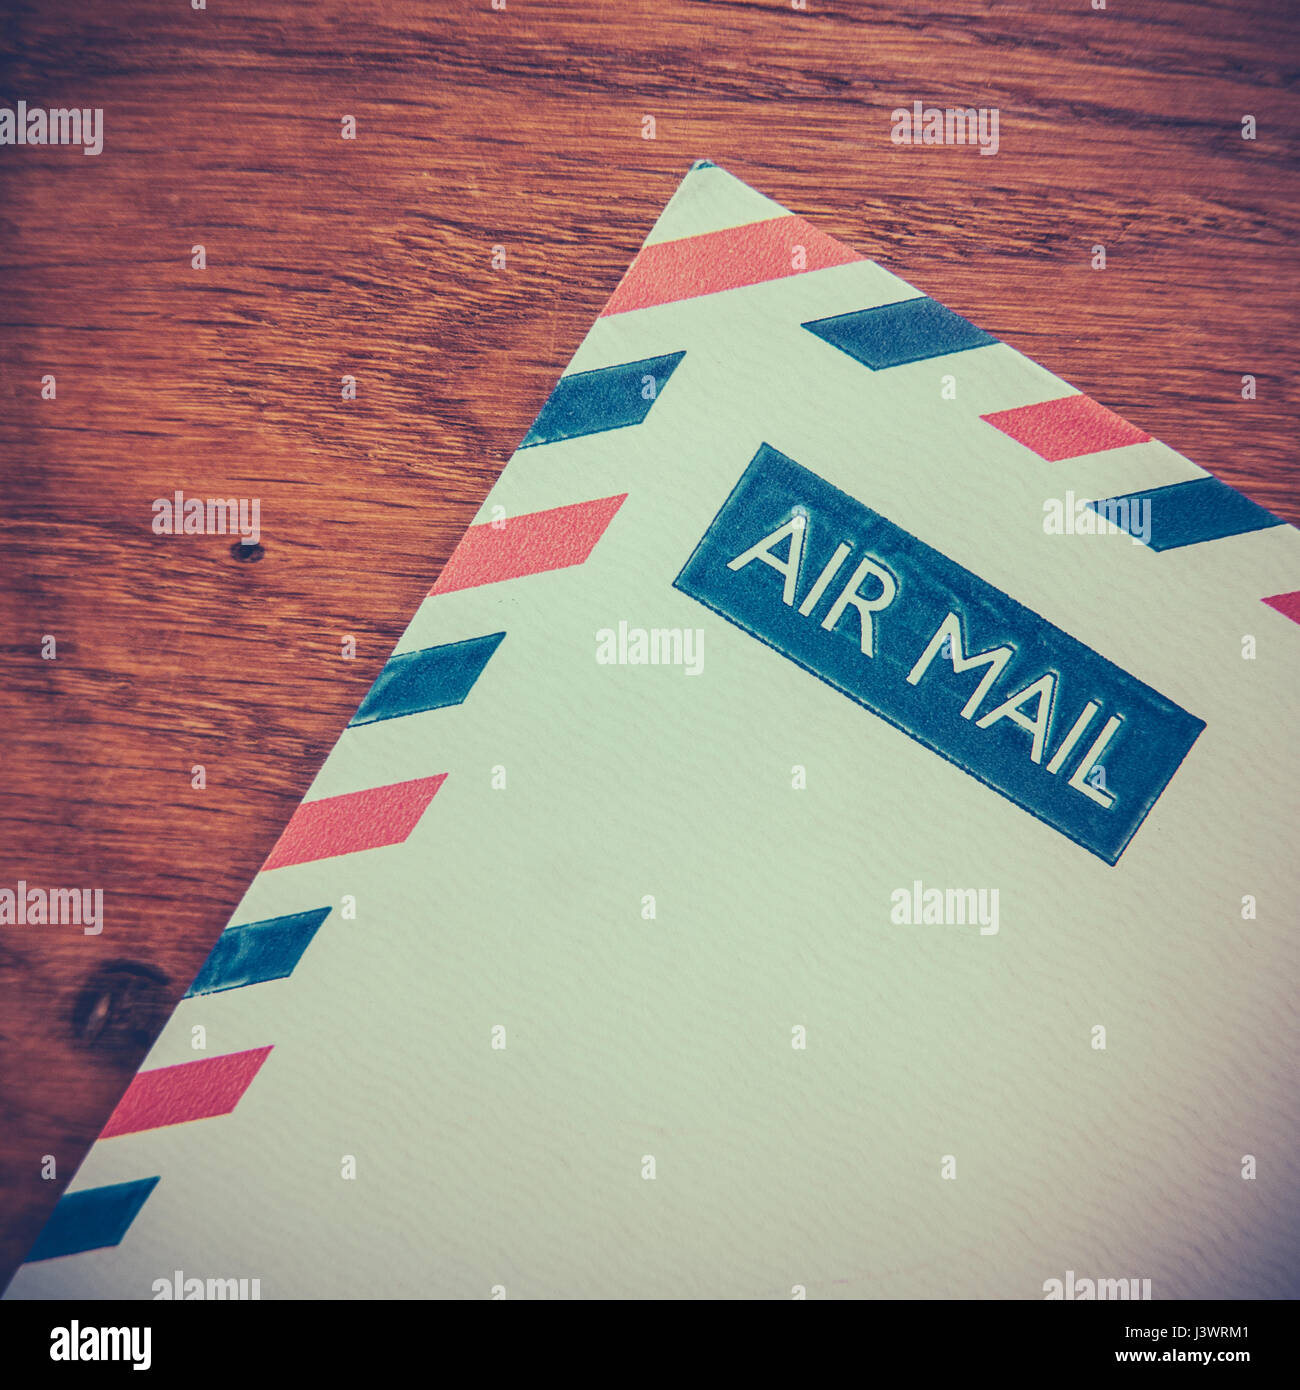 Retro Photo Of An Old Air Mail Envelope Of A Rustic Wooden Background Stock Photo